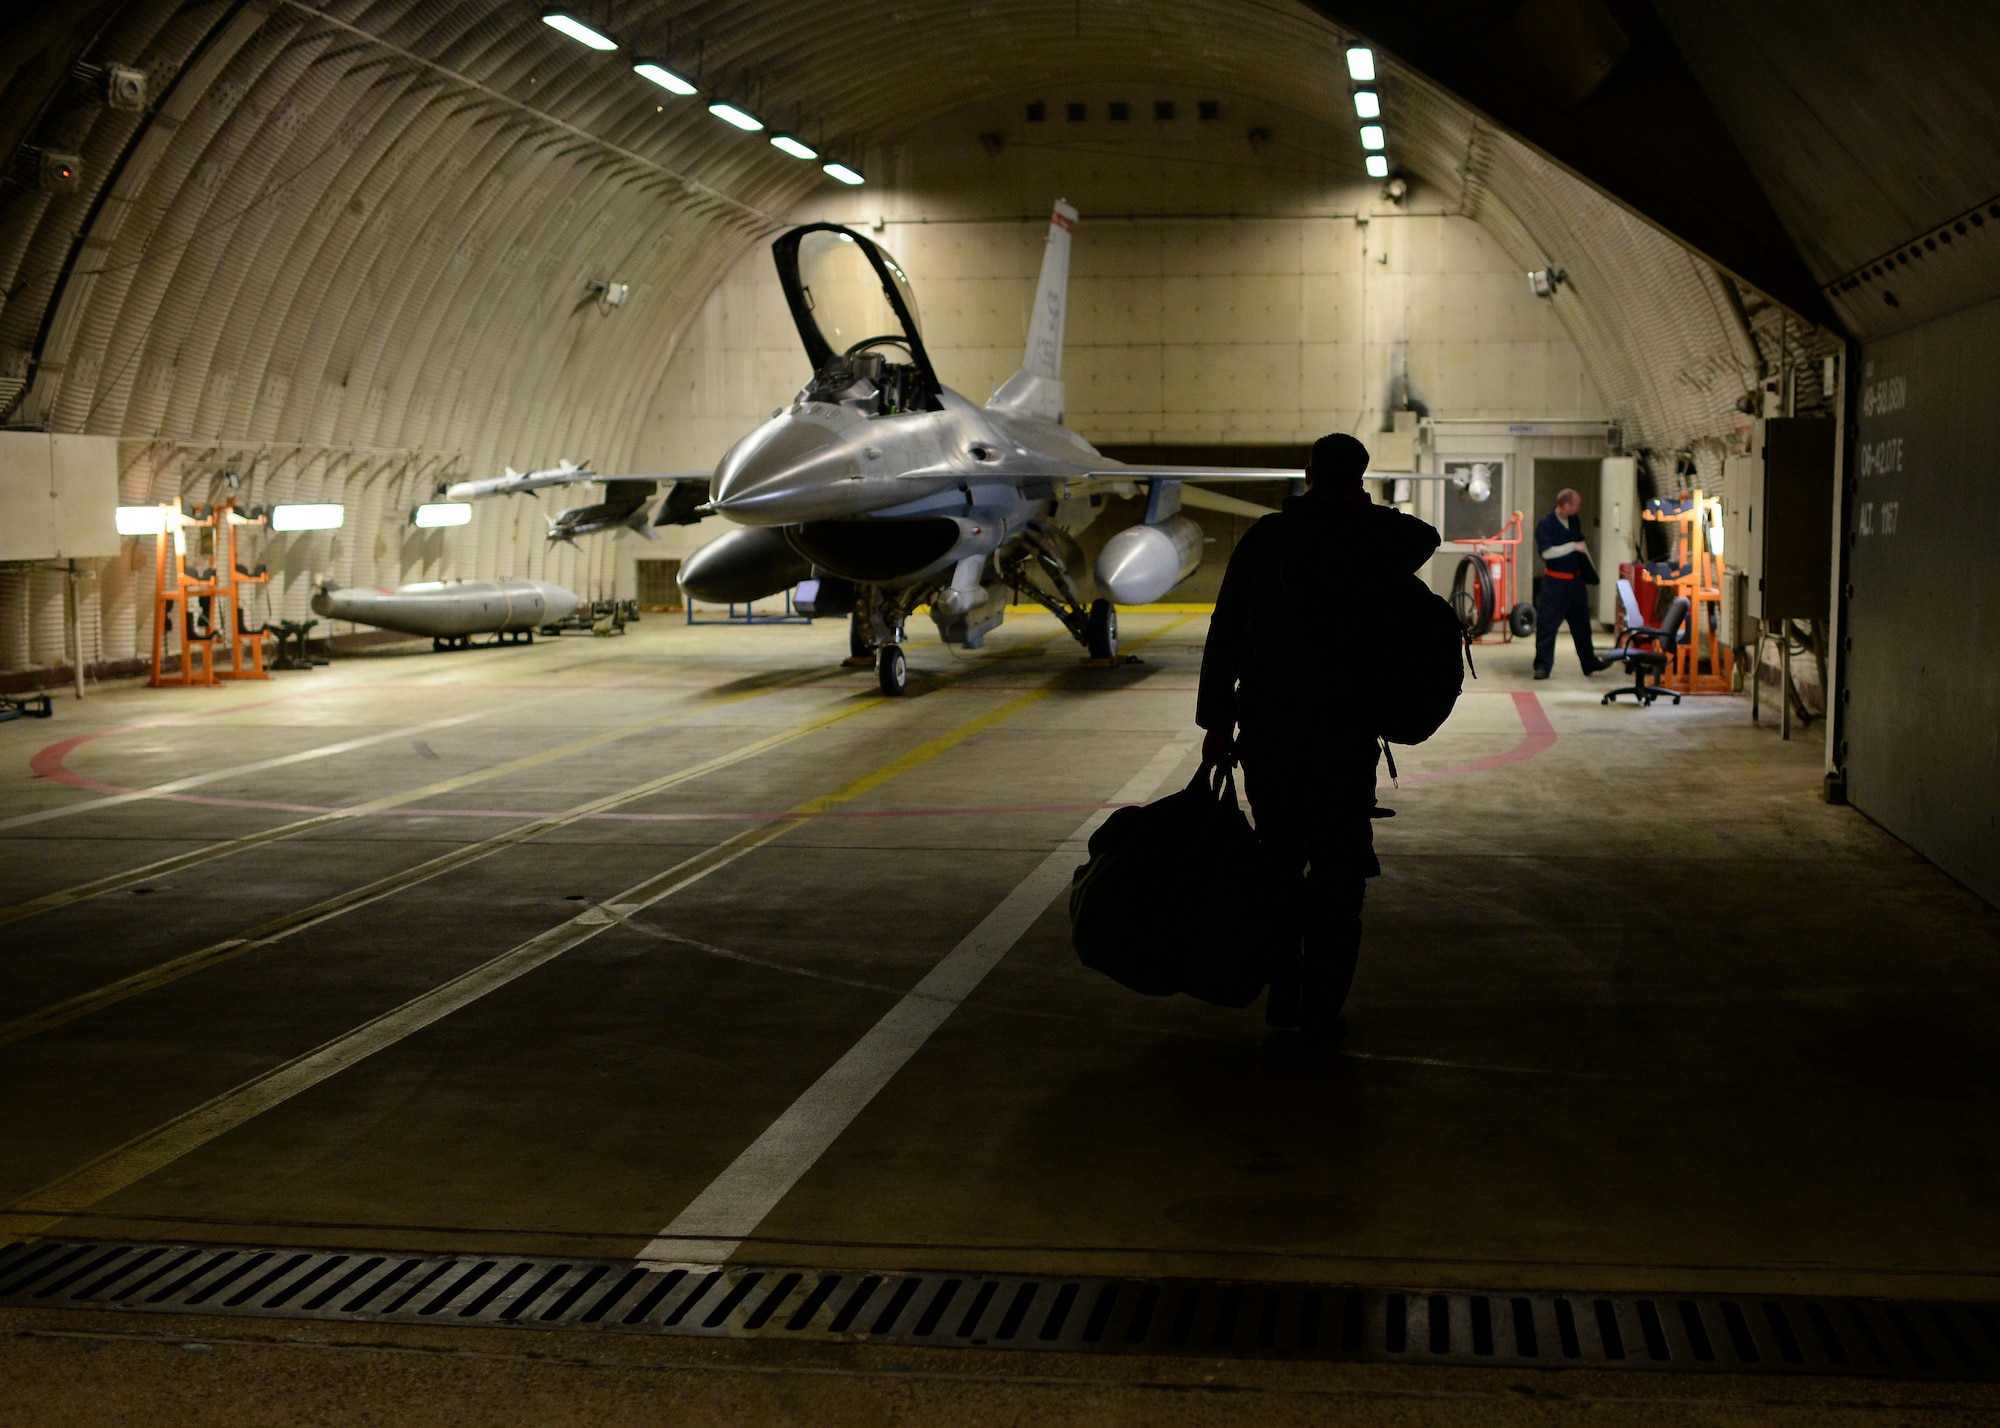 U.S. Air Force Capt. Taylor Blevins, a U.S. Air Force F-16 Fighting Falcon fighter aircraft pilot from the 480th Fighter Squadron at Spangdahlem Air Base, Germany, walks toward his jet in a hardened aircraft shelter Aug. 8, 2014, before leaving for a training event in Souda Bay, Greece, Aug. 11-23. Nearly 20 aircraft from Spangdahlem are participating in this training event, which aims to maintain regional peace and stability throughout Europe. (U.S. Air Force photo by Staff Sgt. Daryl Knee/Released)